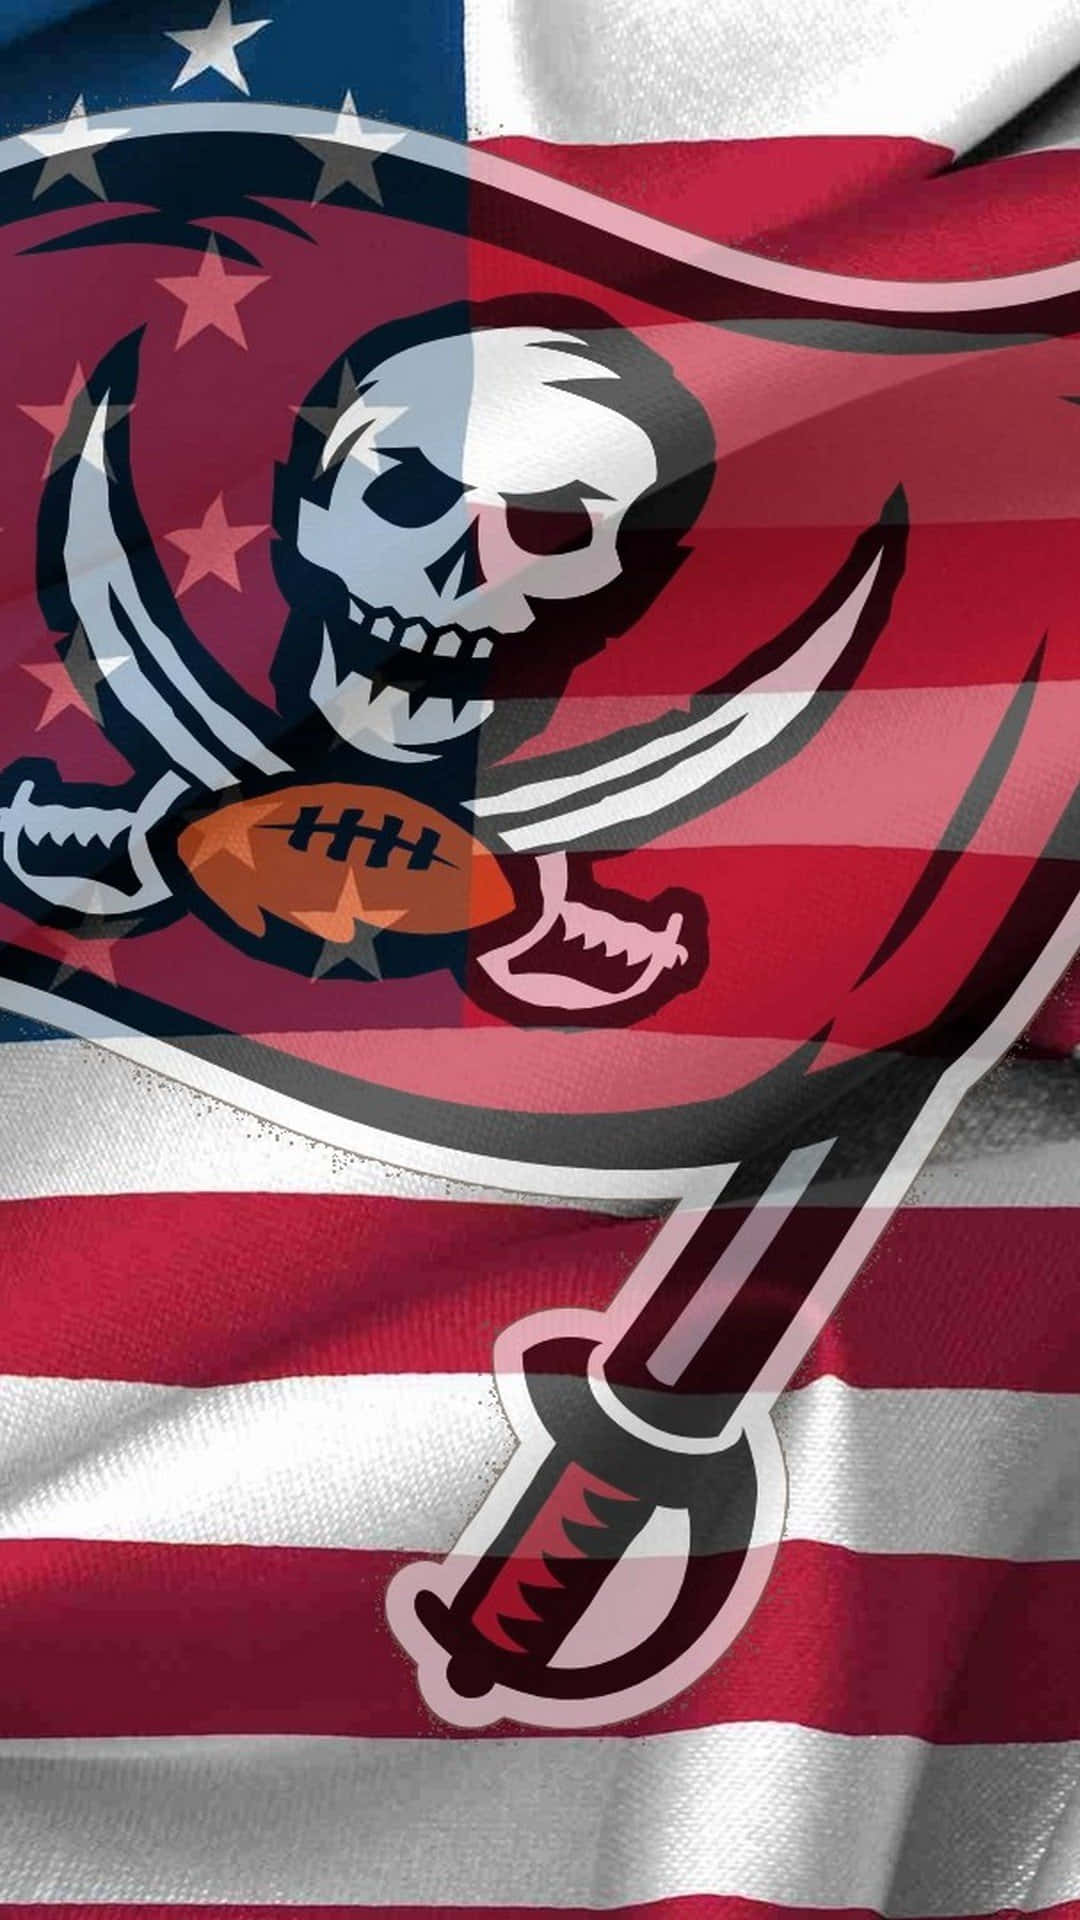 Get your Tampa Bay Buccaneers iPhone now and show off your team pride. Wallpaper